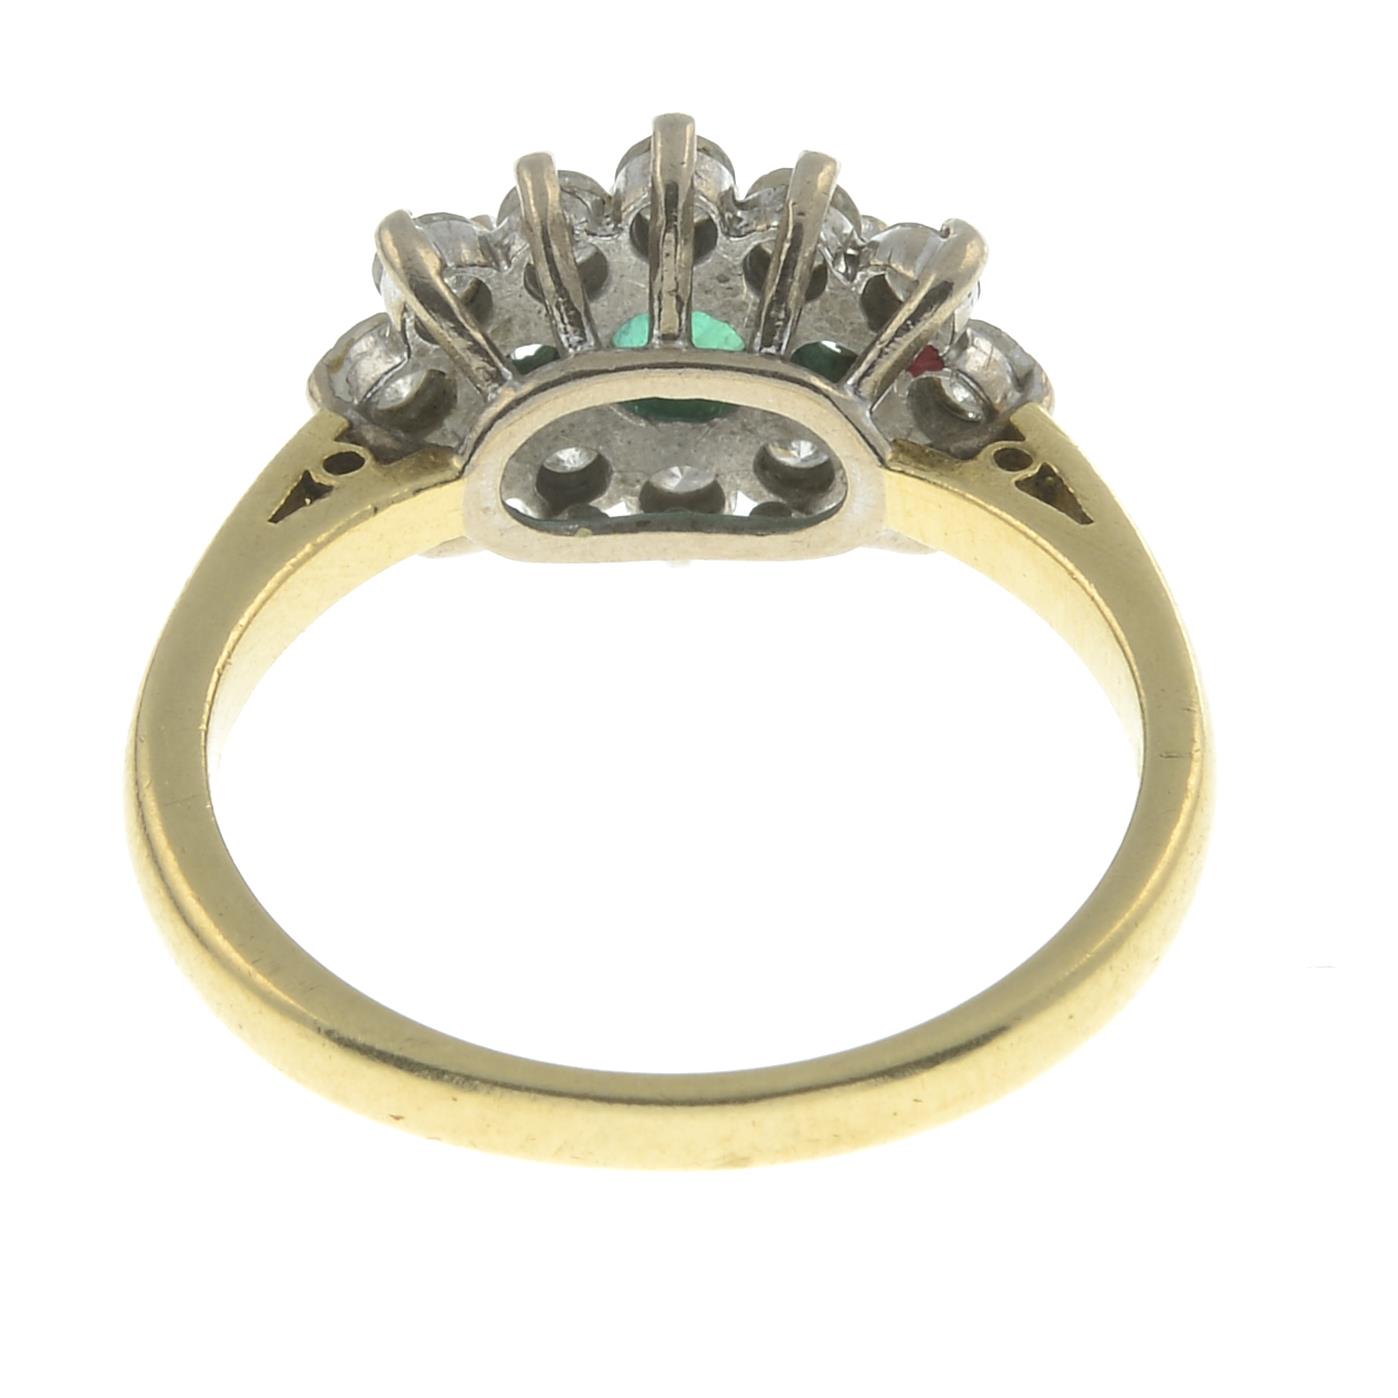 An 18ct gold emerald and diamond dress ring.Estimated total diamond weight 0.80ct. - Image 2 of 2